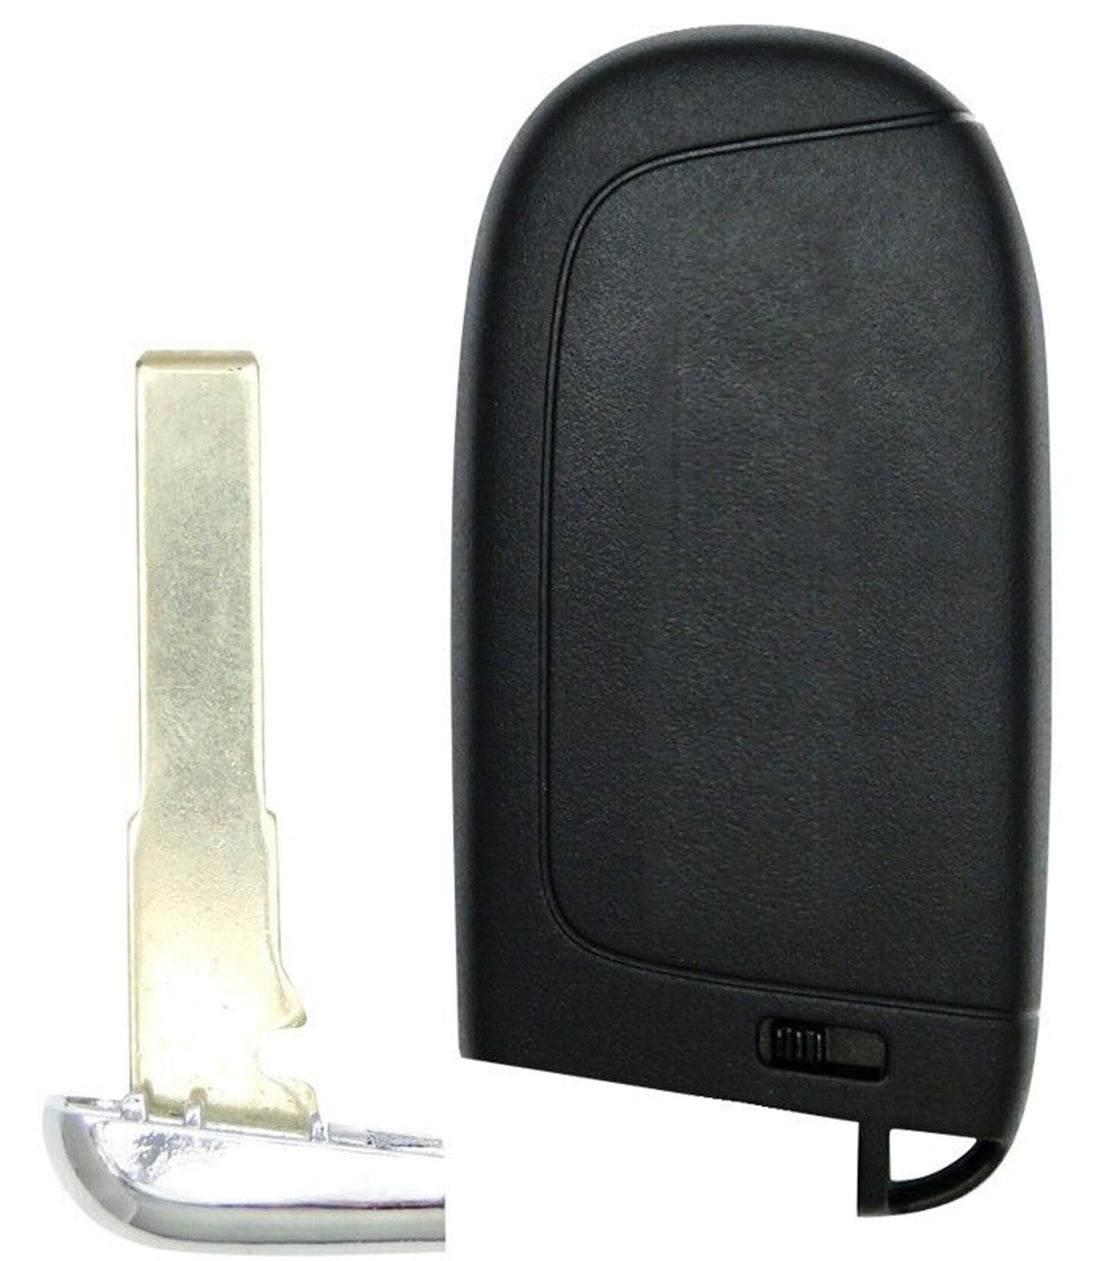 2023 Ram ProMaster 3500 Replacement Key Fob Remote